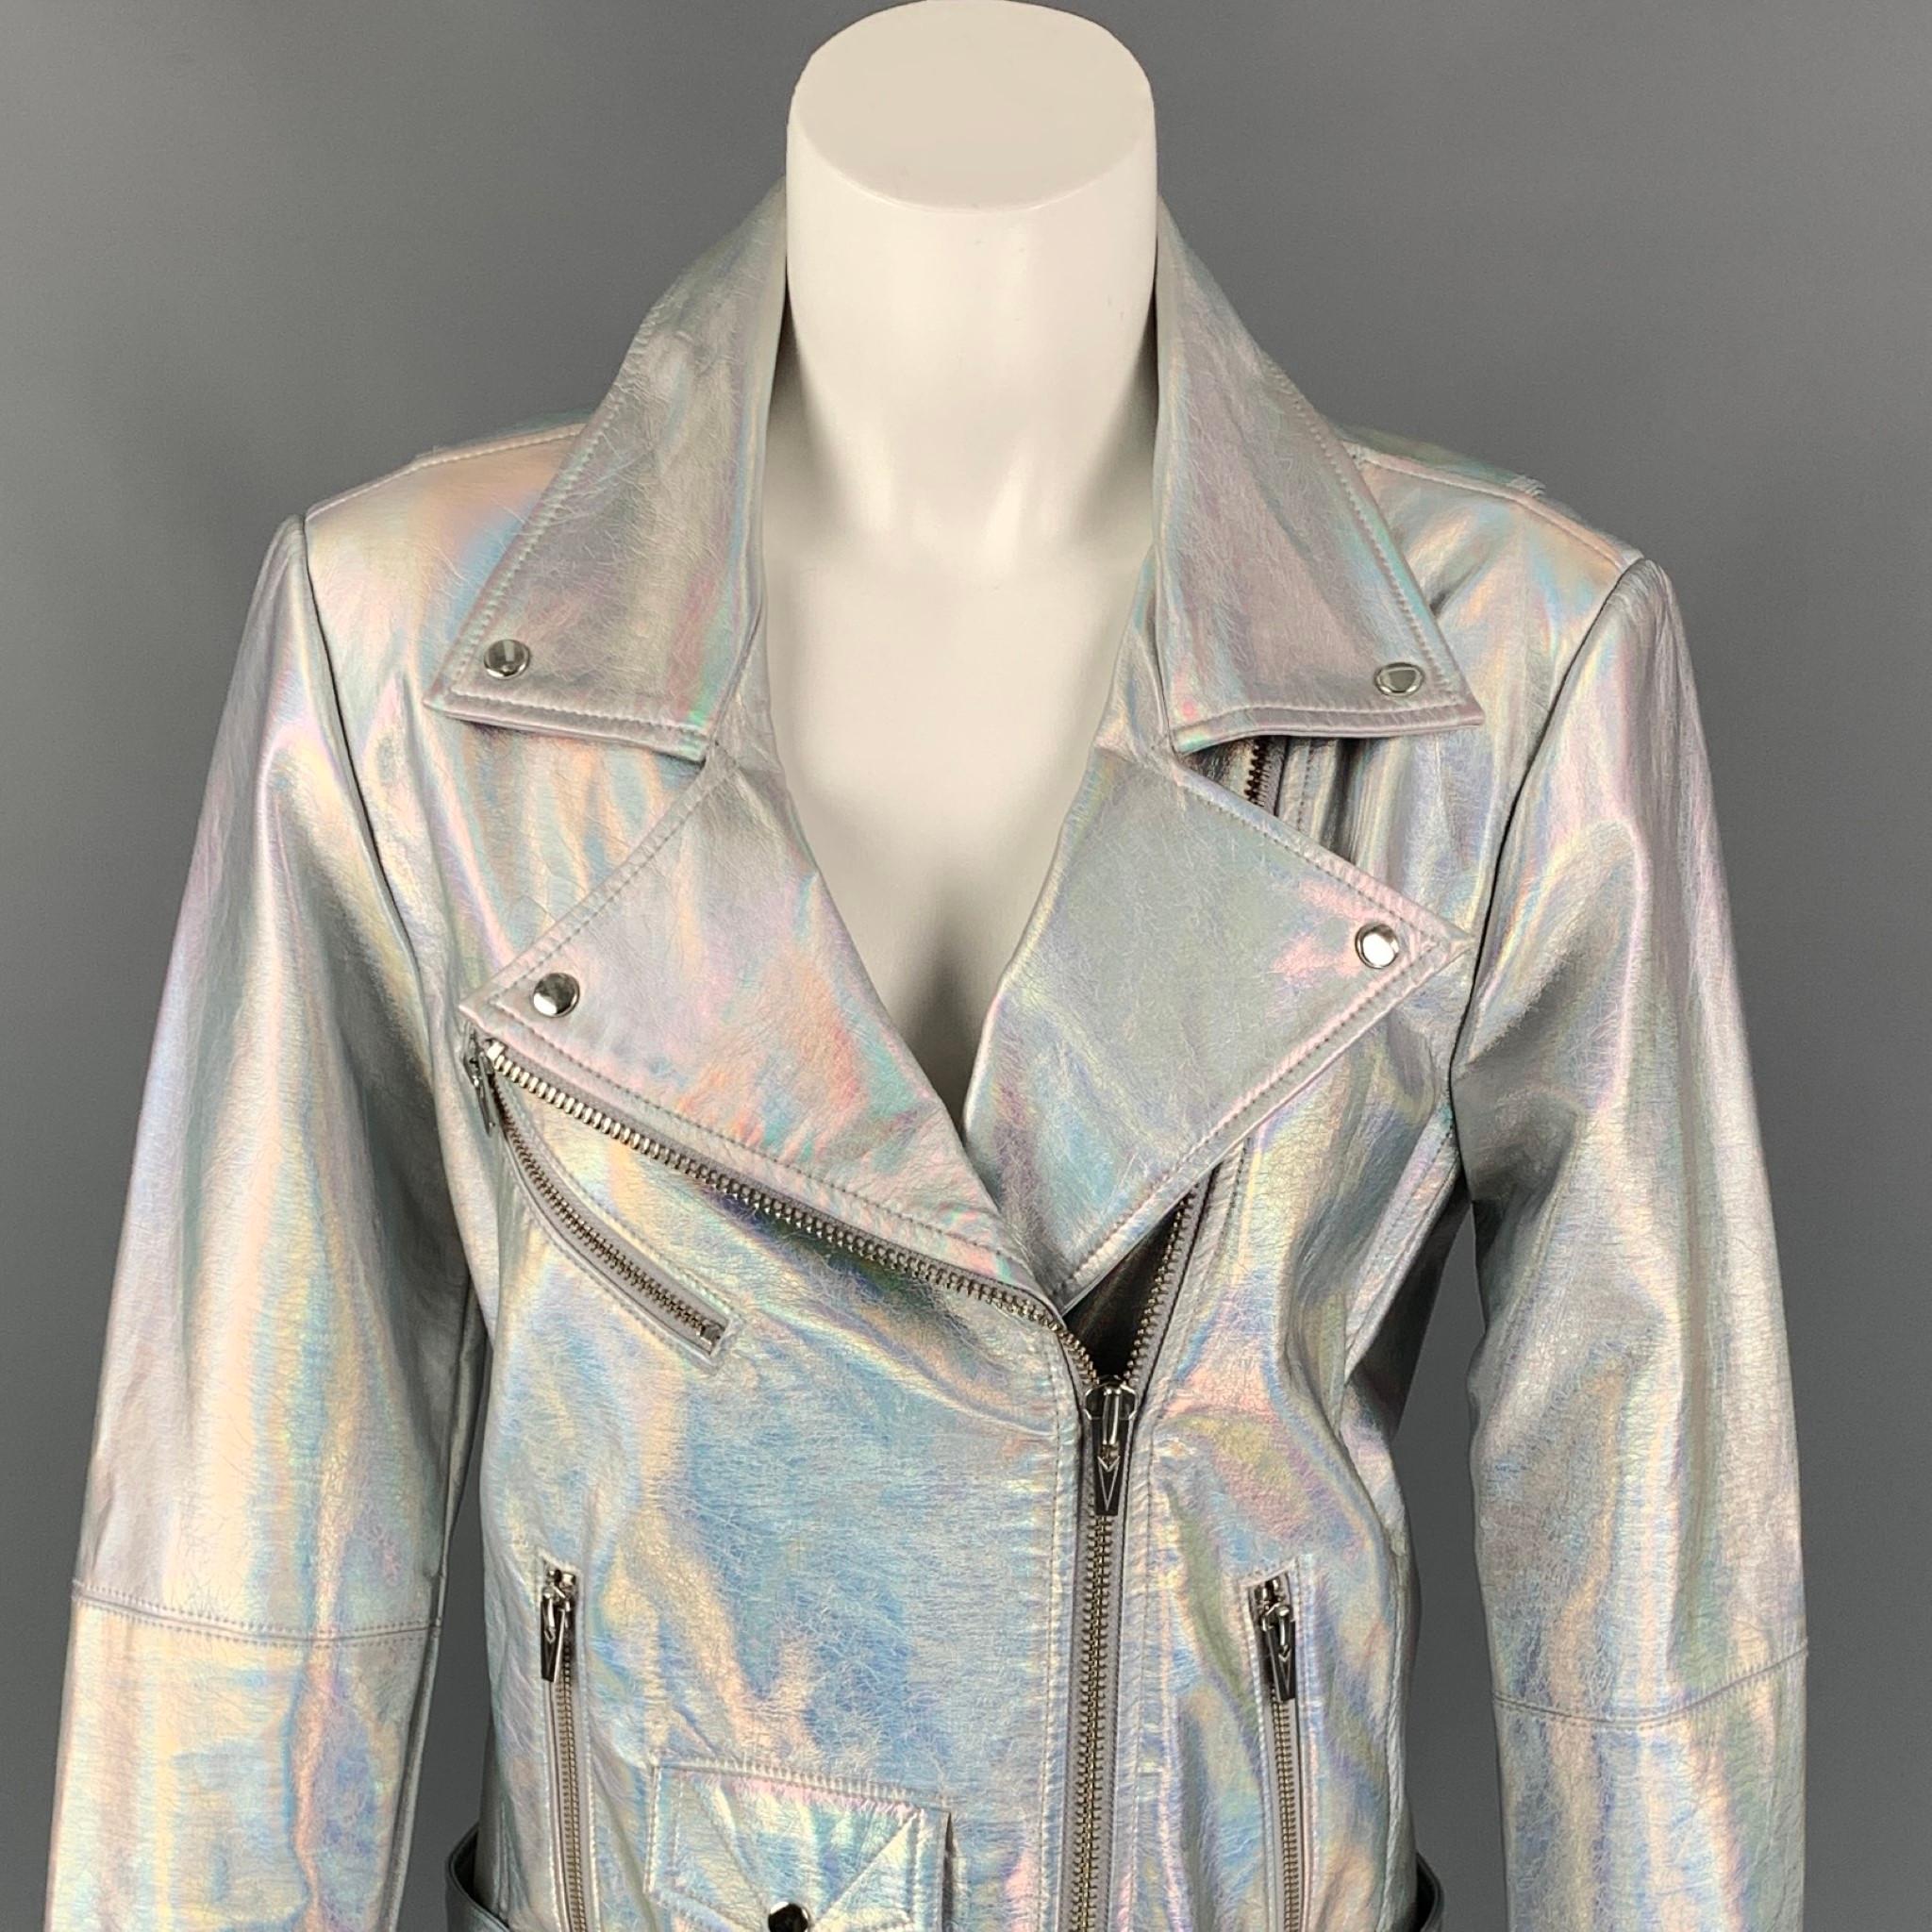 VEDA jacket comes in a silver iridescent polyurethane with a full liner featuring a biker style, front pockets, belted, snap button details, and a zip up closure. 

Very Good Pre-Owned Condition.
Marked: M

Measurements:

Shoulder: 16.5 in.
Bust: 36